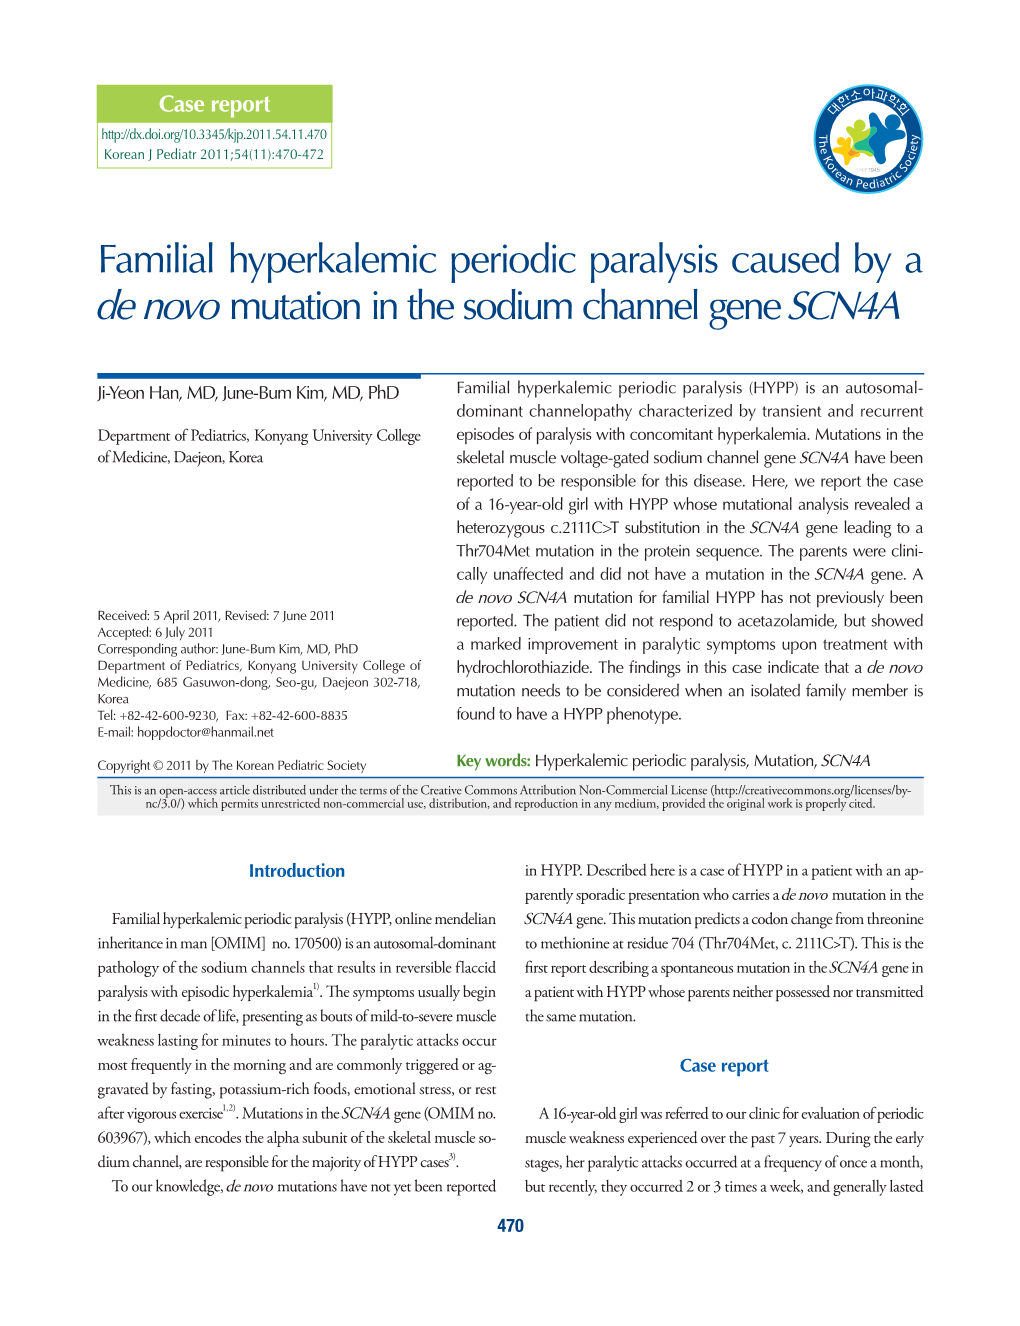 Familial Hyperkalemic Periodic Paralysis Caused by a De Novo Mutation in the Sodium Channel Gene SCN4A